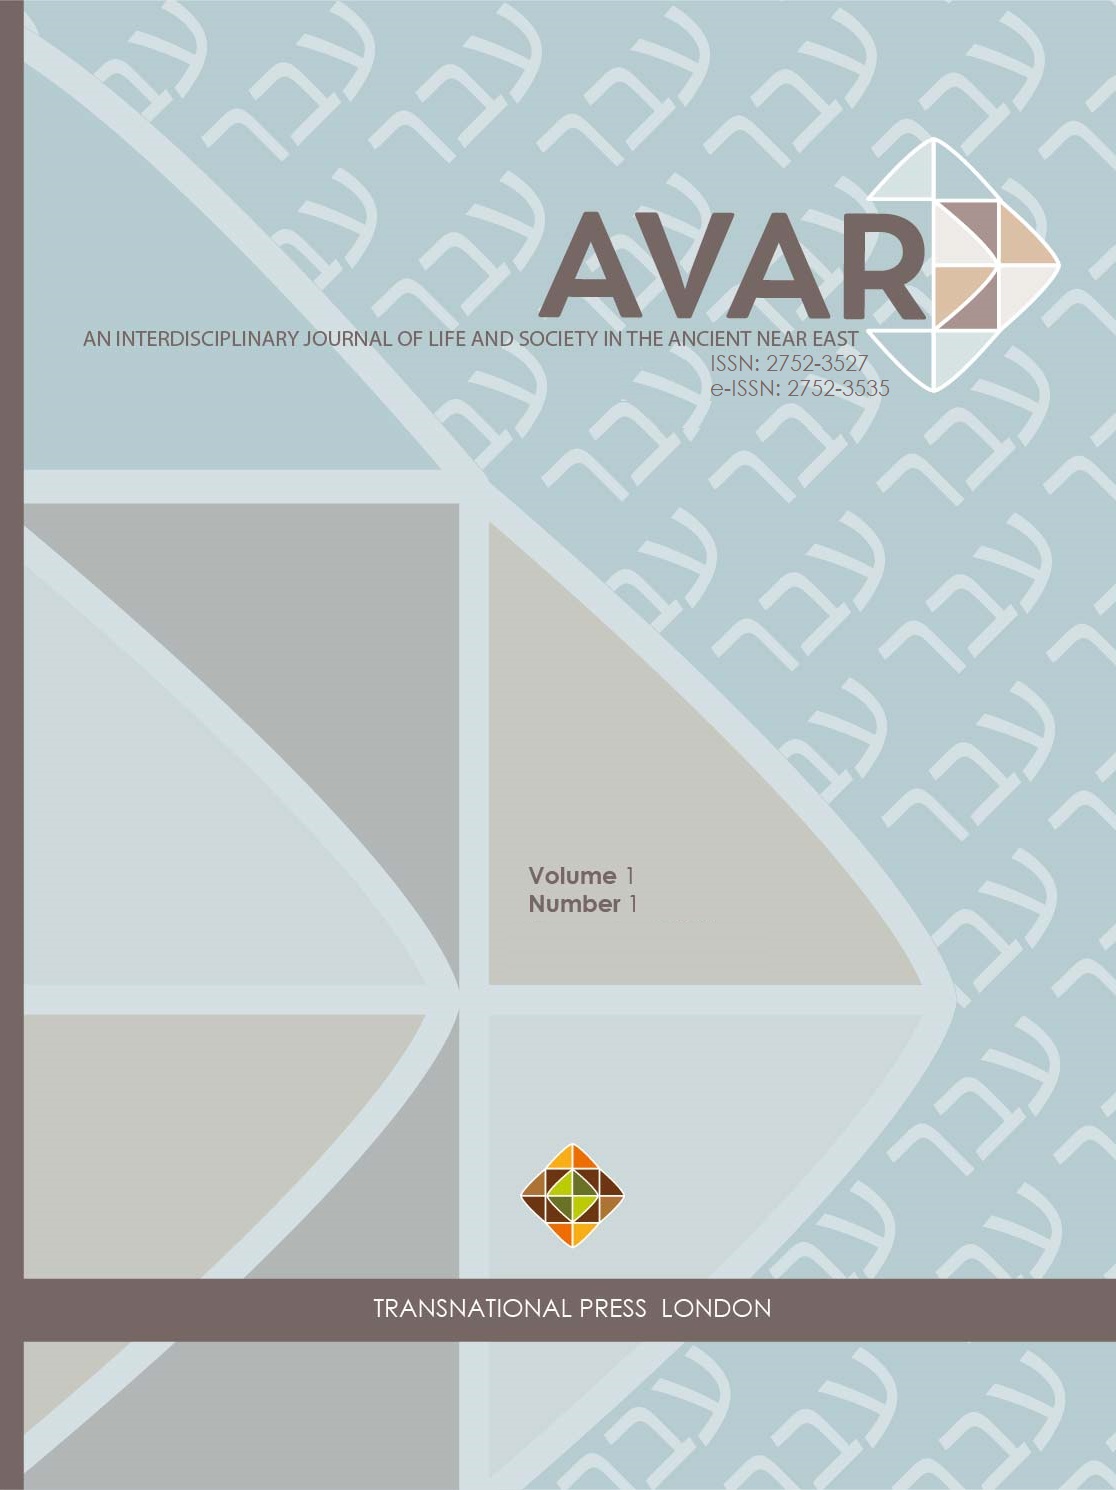 Avar: An Interdisciplinary Journal of Life and Society in the Ancient Near East